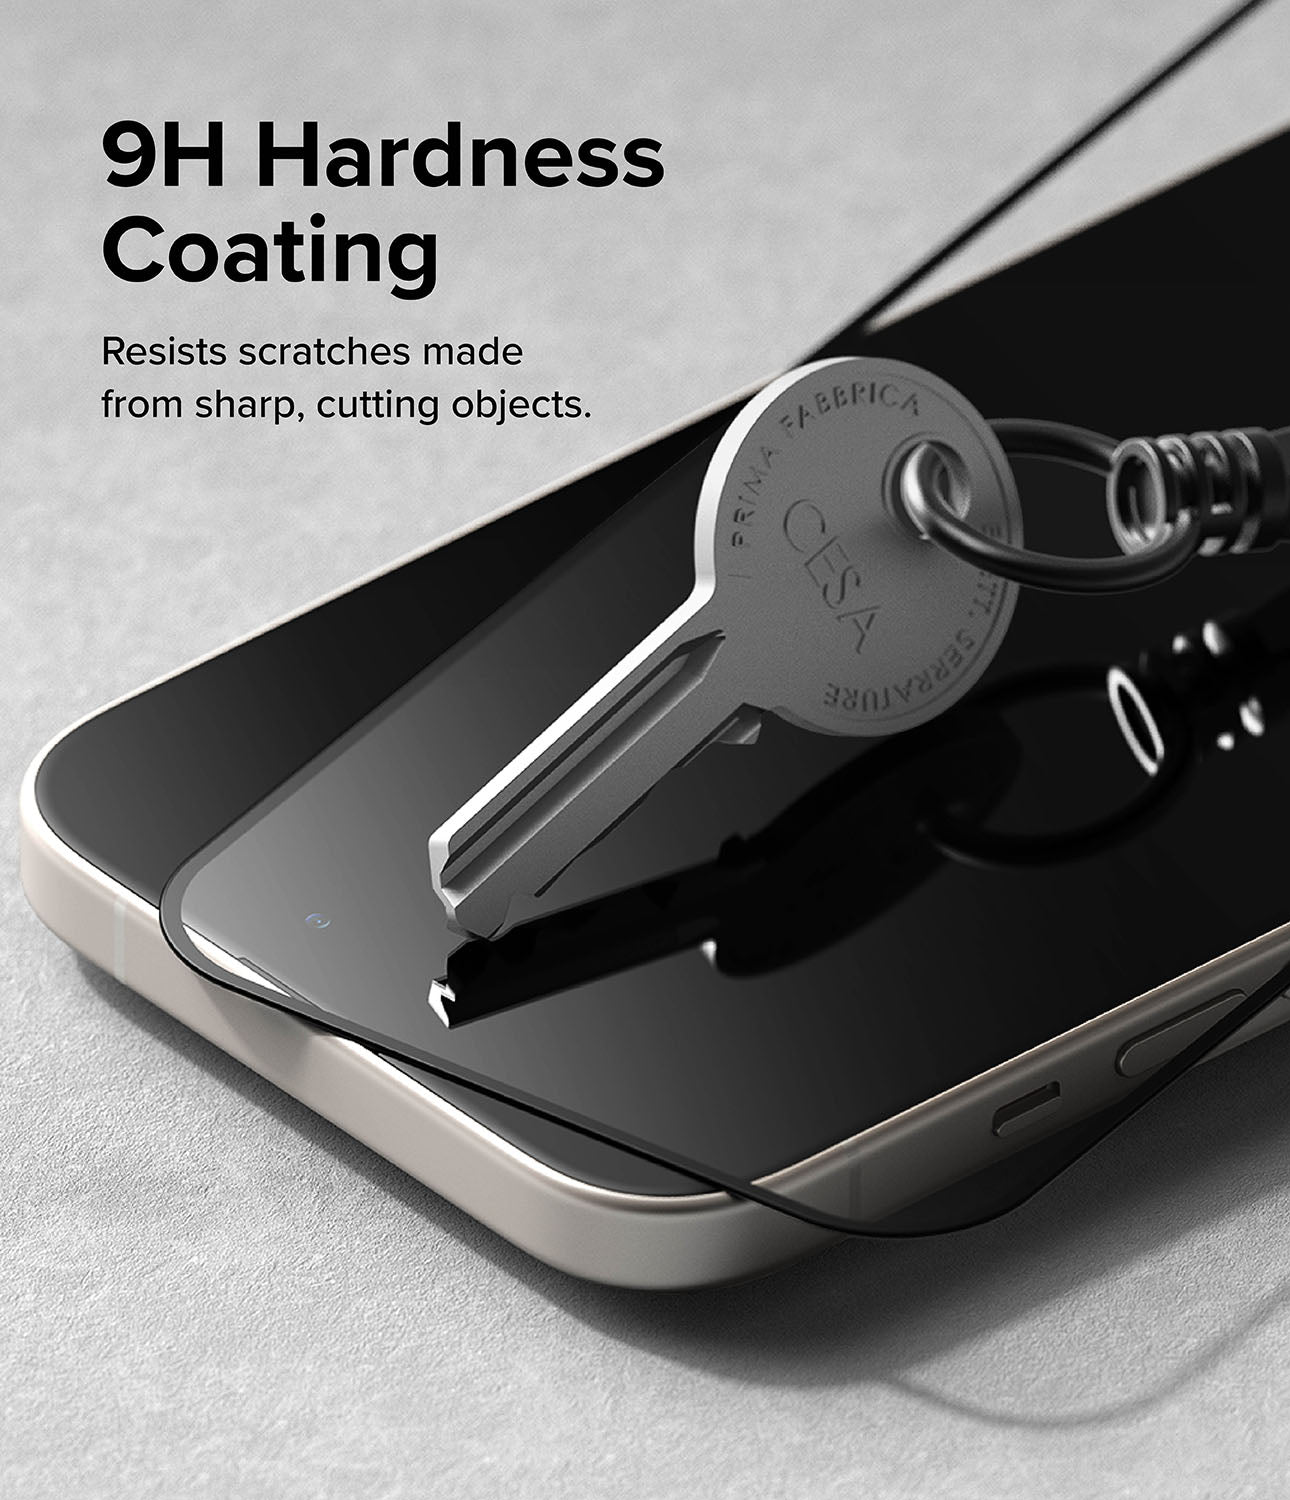 iPhone 15 Plus Screen Protector | Full Cover Glass Premium edge-to-edge 9H hardness tempered glass protector